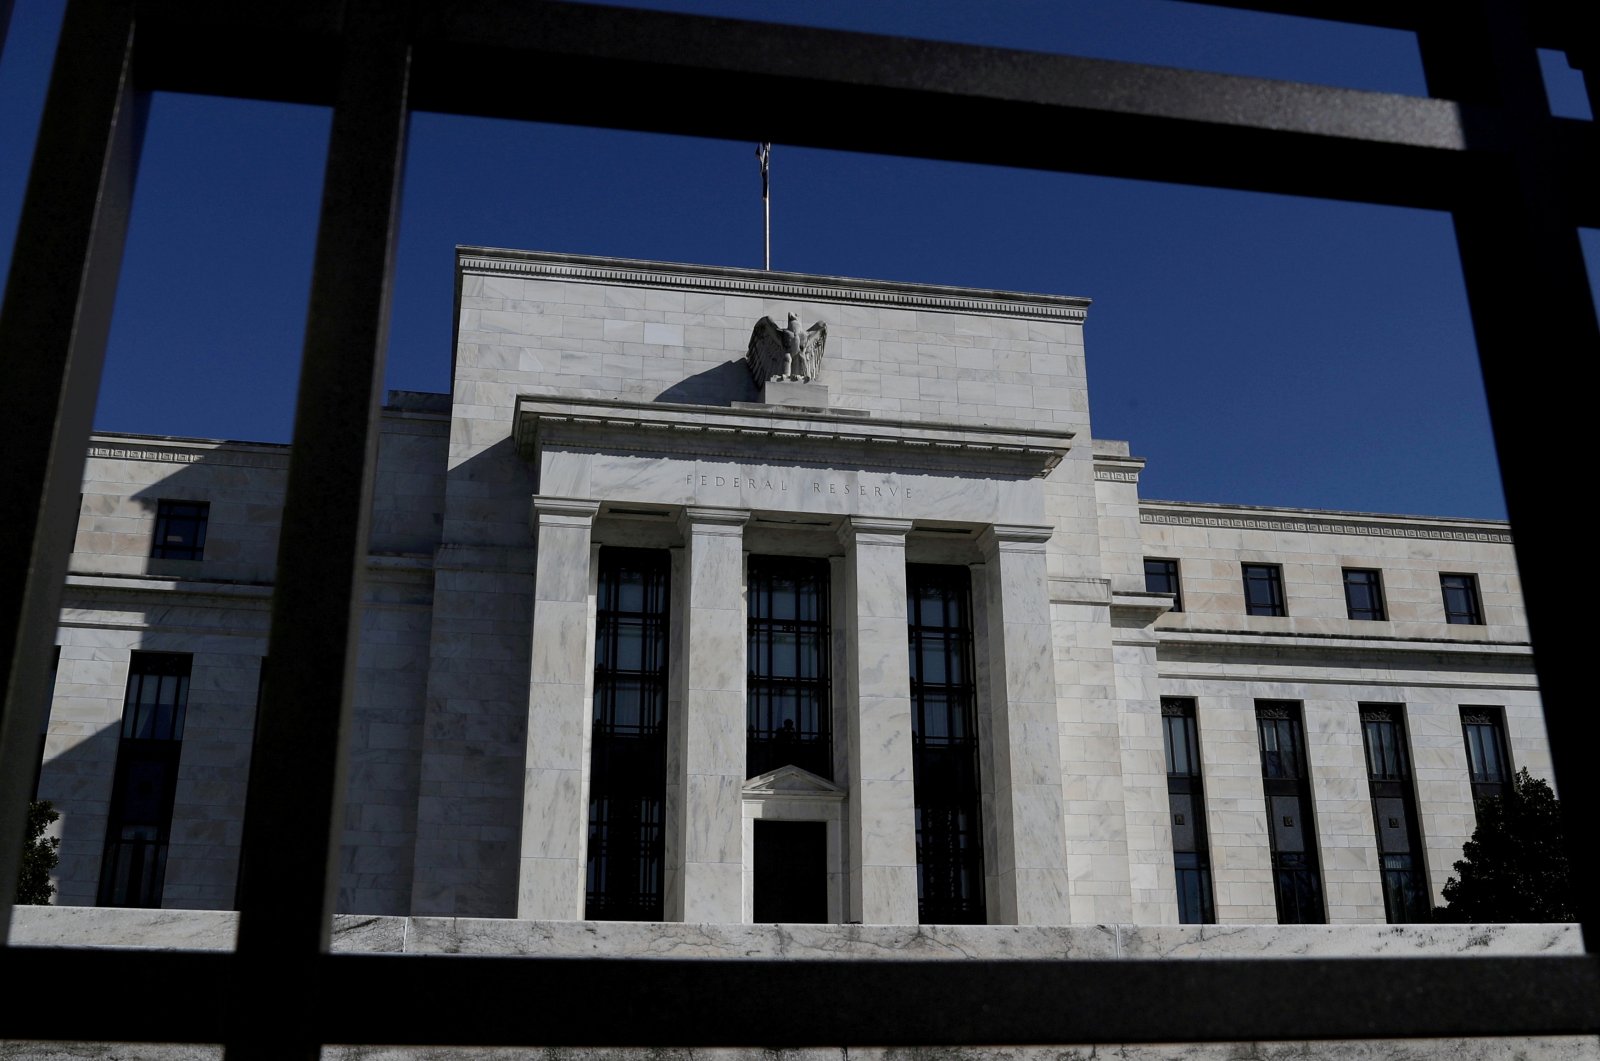 The exterior of the Federal Reserve building, Washington, D.C., United States. (Reuters Photo)